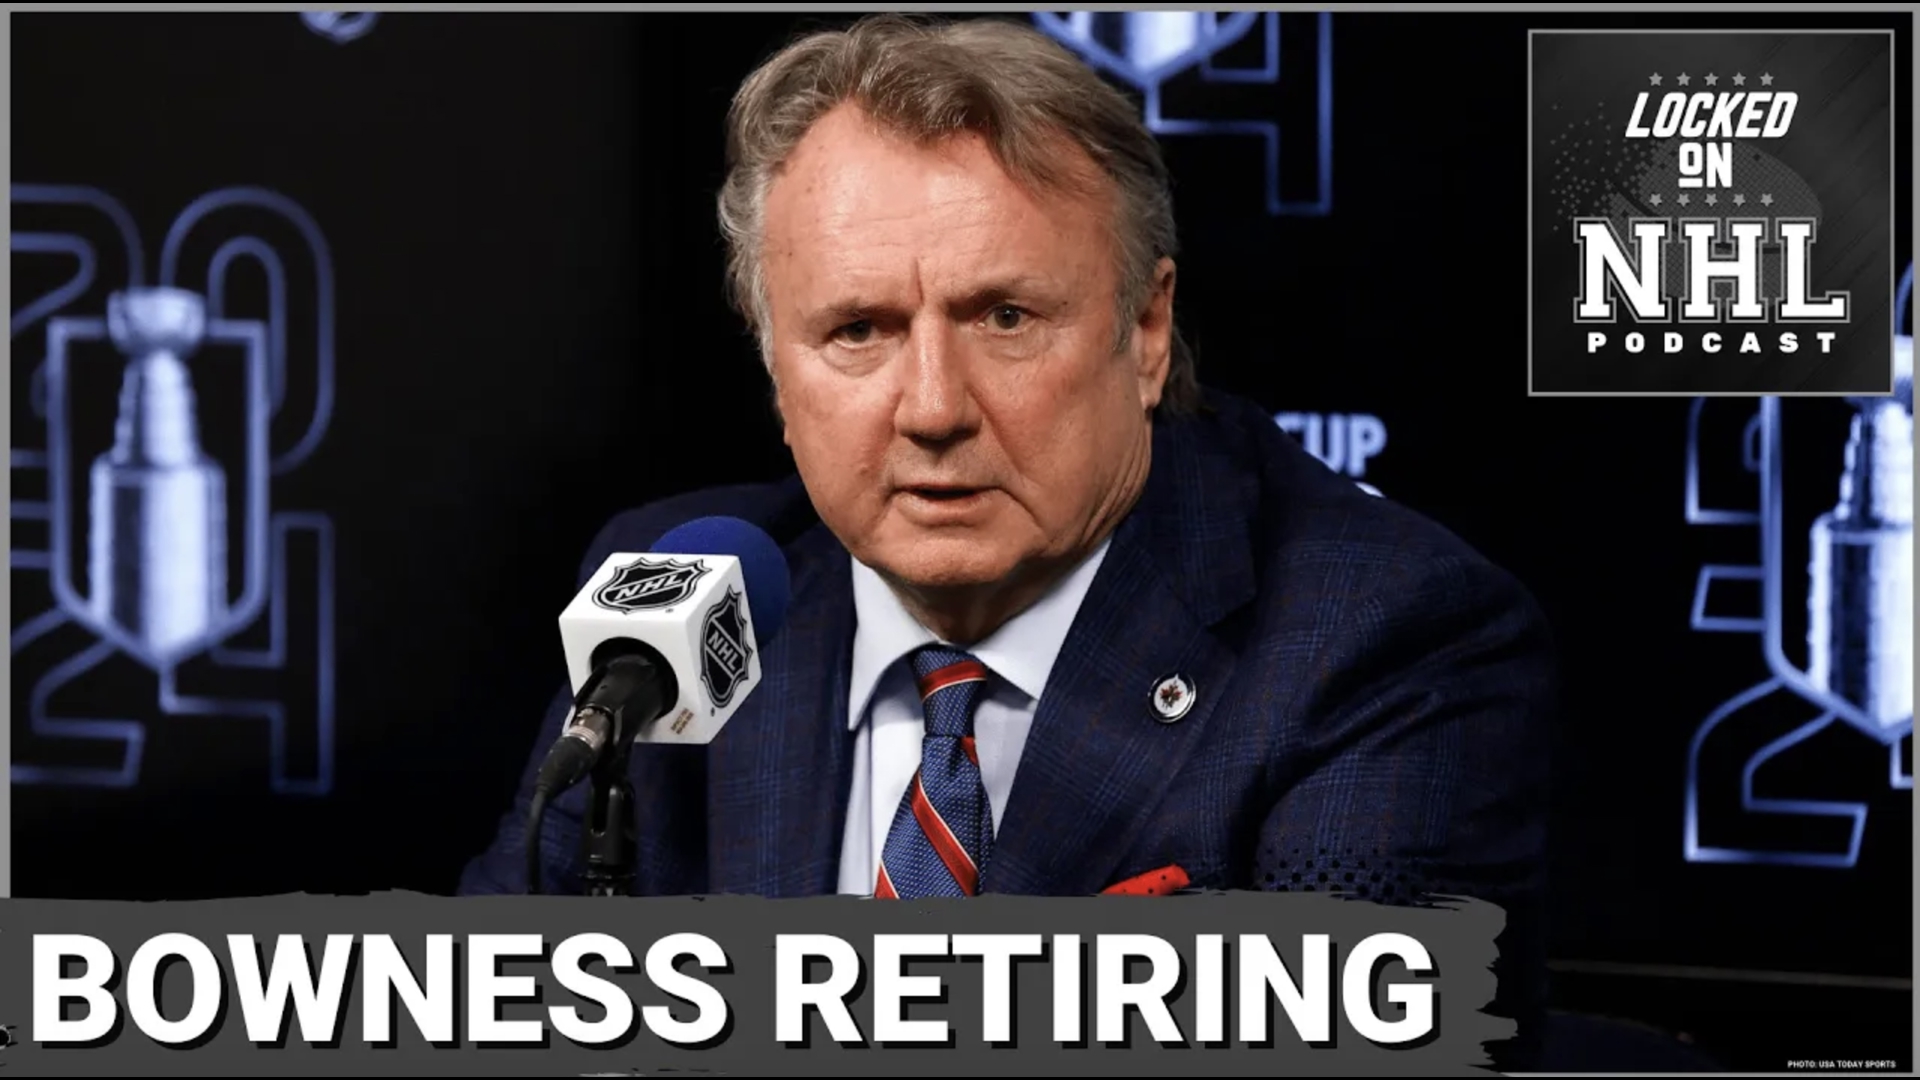 On today's episode of Locked on NHL, Seth Toupal and Nick Morgan discuss the retirement of Rick Bowness.